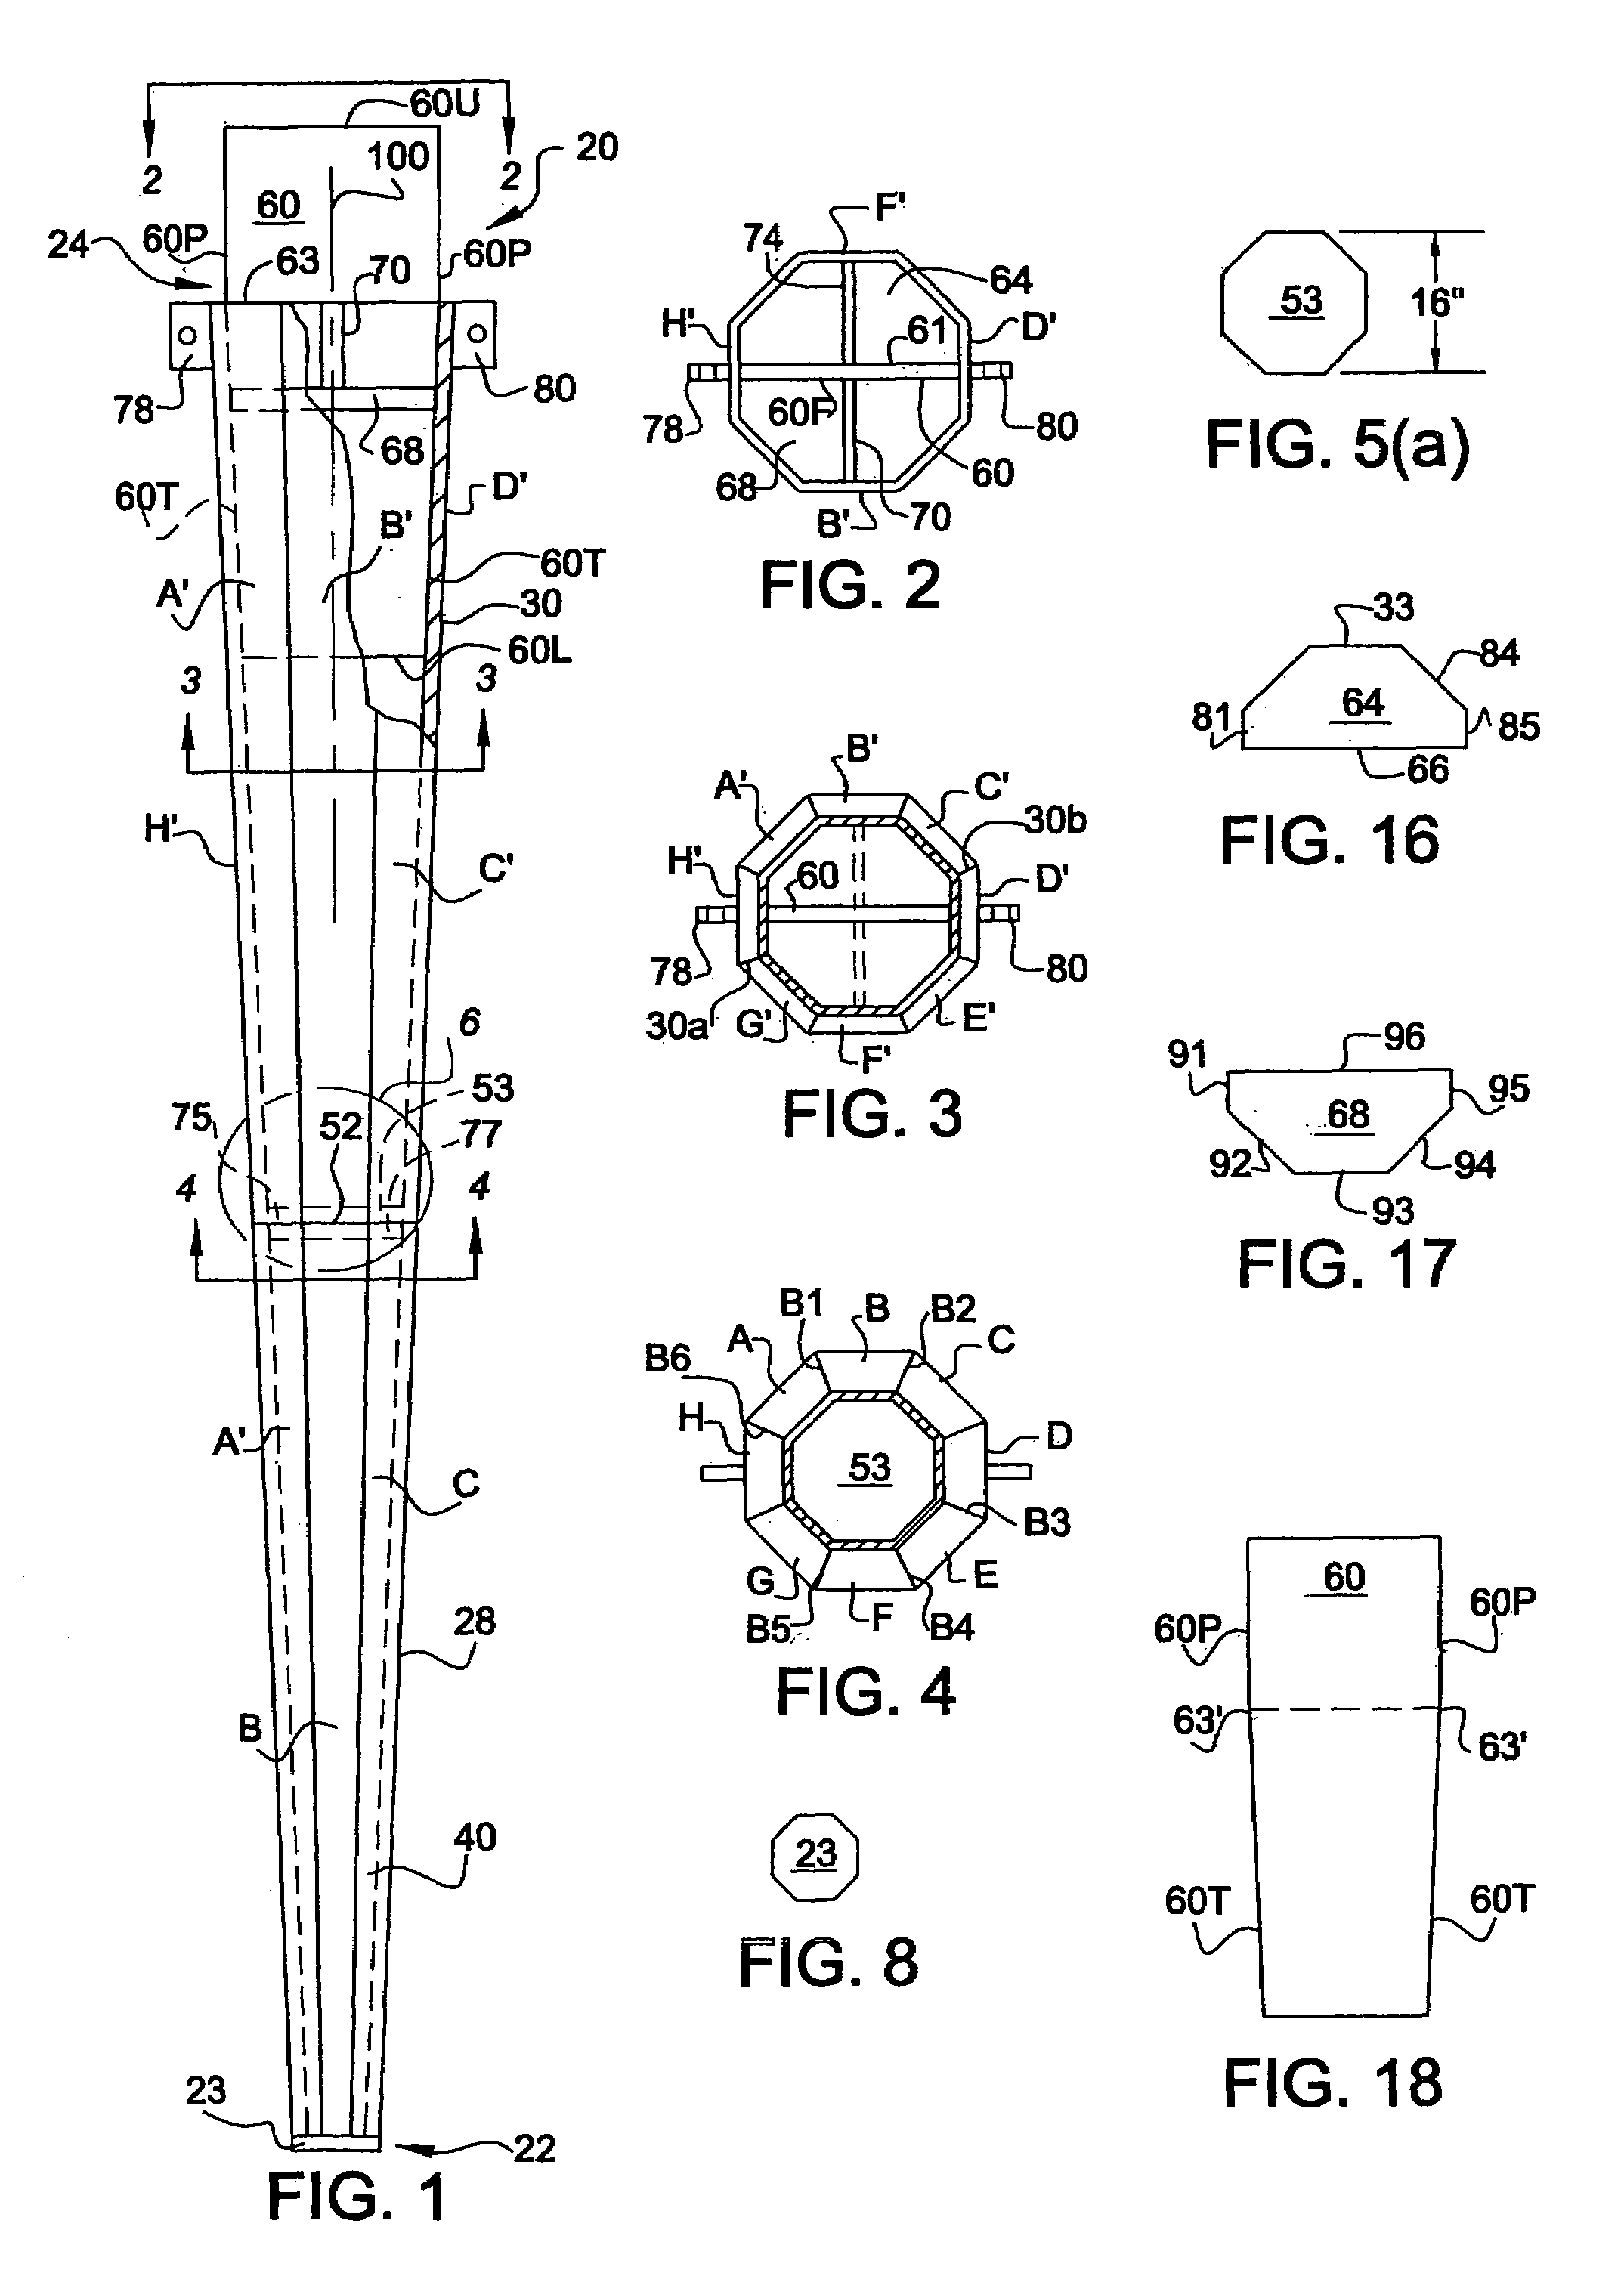 Apparatus for providing a rammed aggregate pier